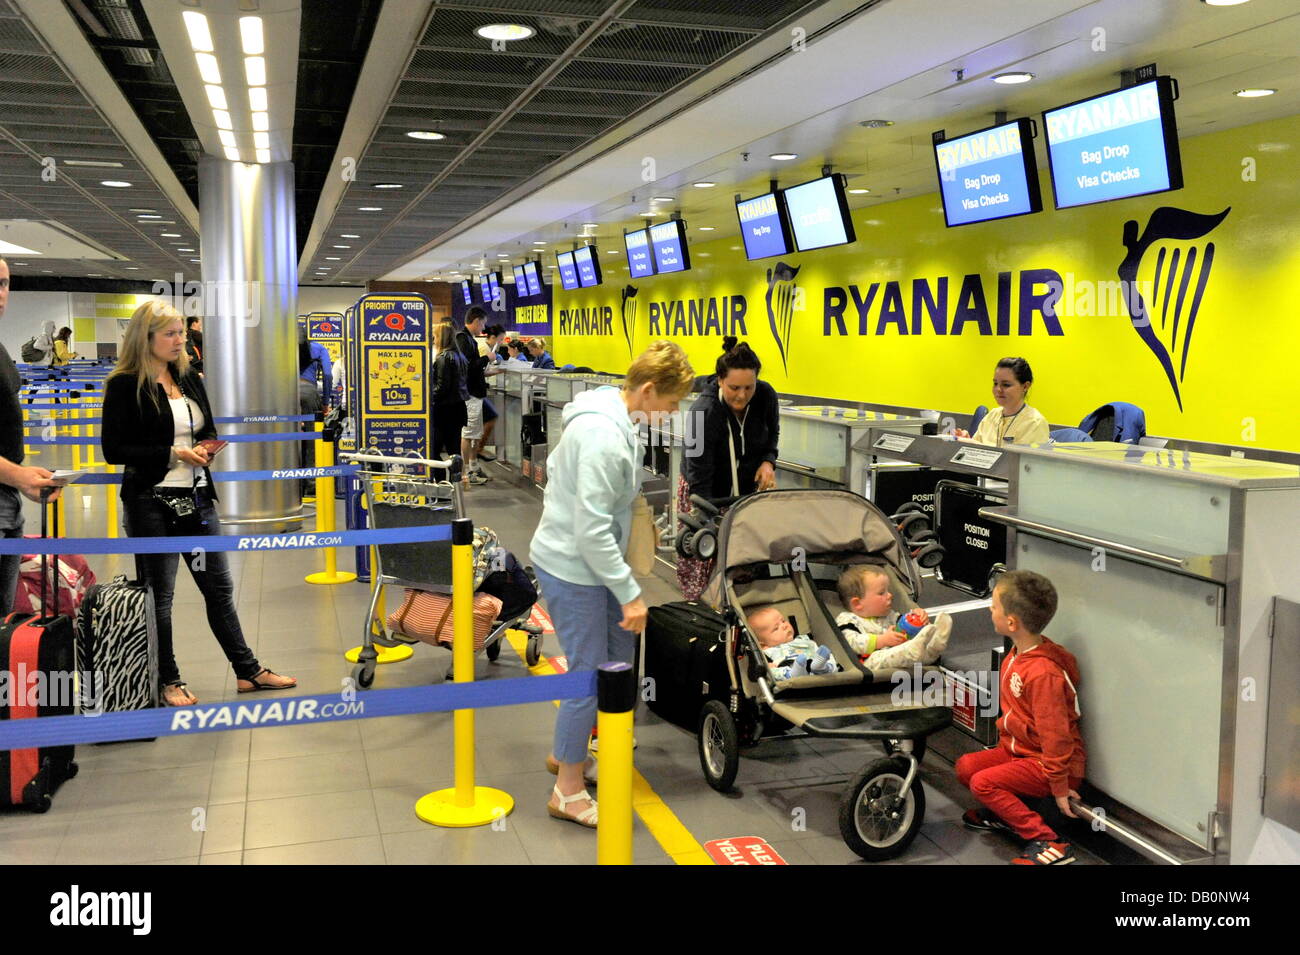 Passengers of the irish airline company Ryanair stand on June 28, 2013, in front of a check-in counter at Dublin Airport. Stock Photo